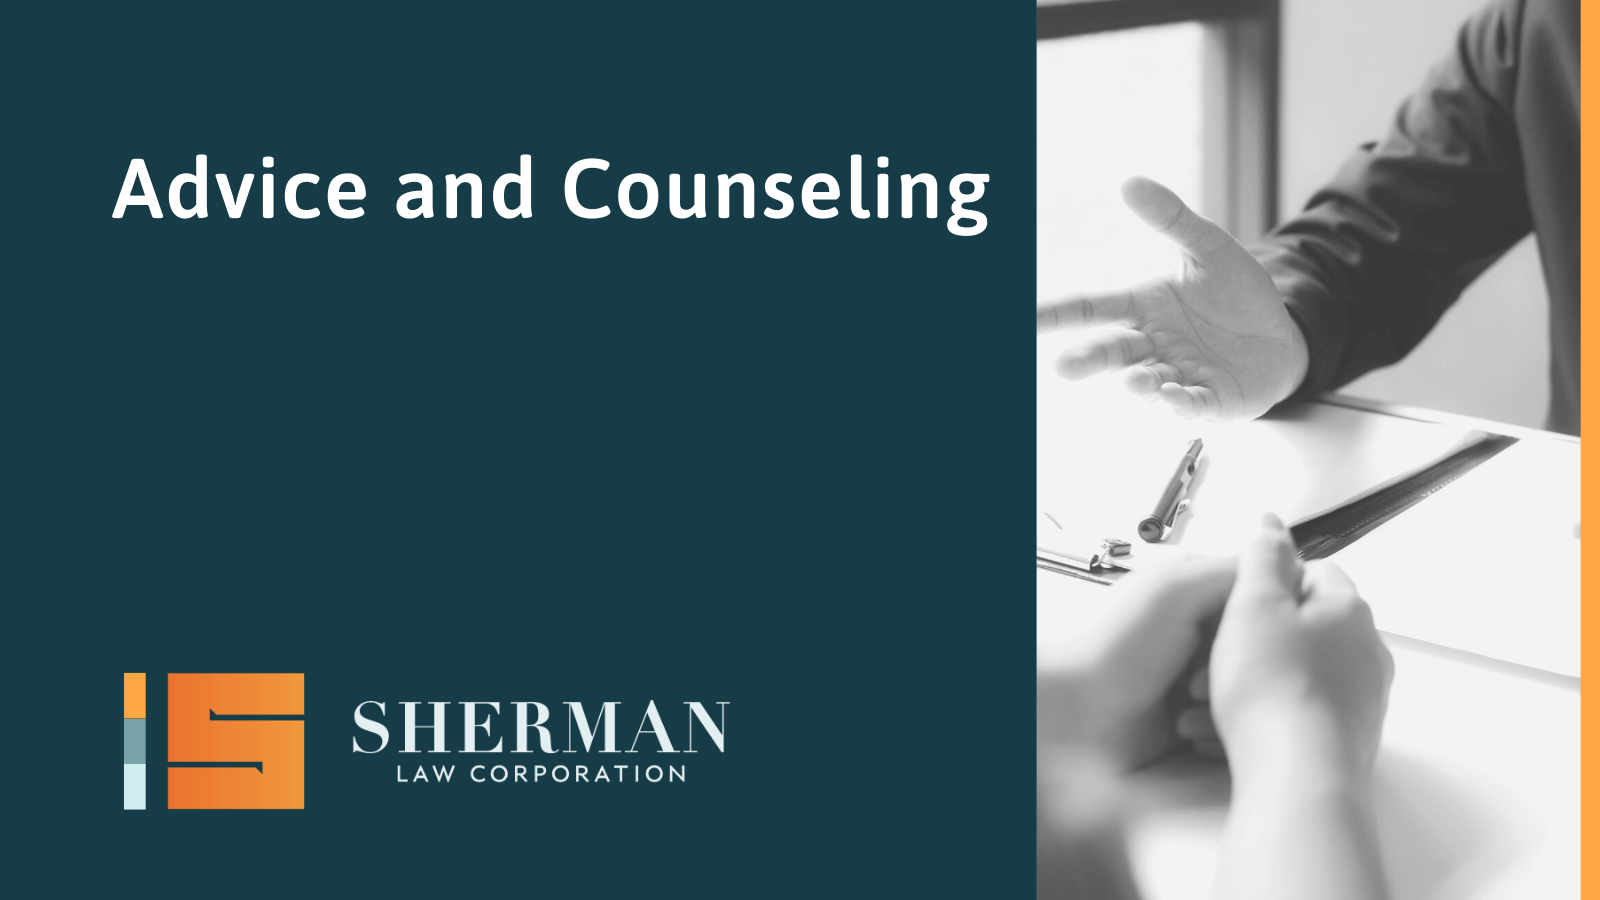 Advice and Counseling- california employment lawyer - sherman law corporation